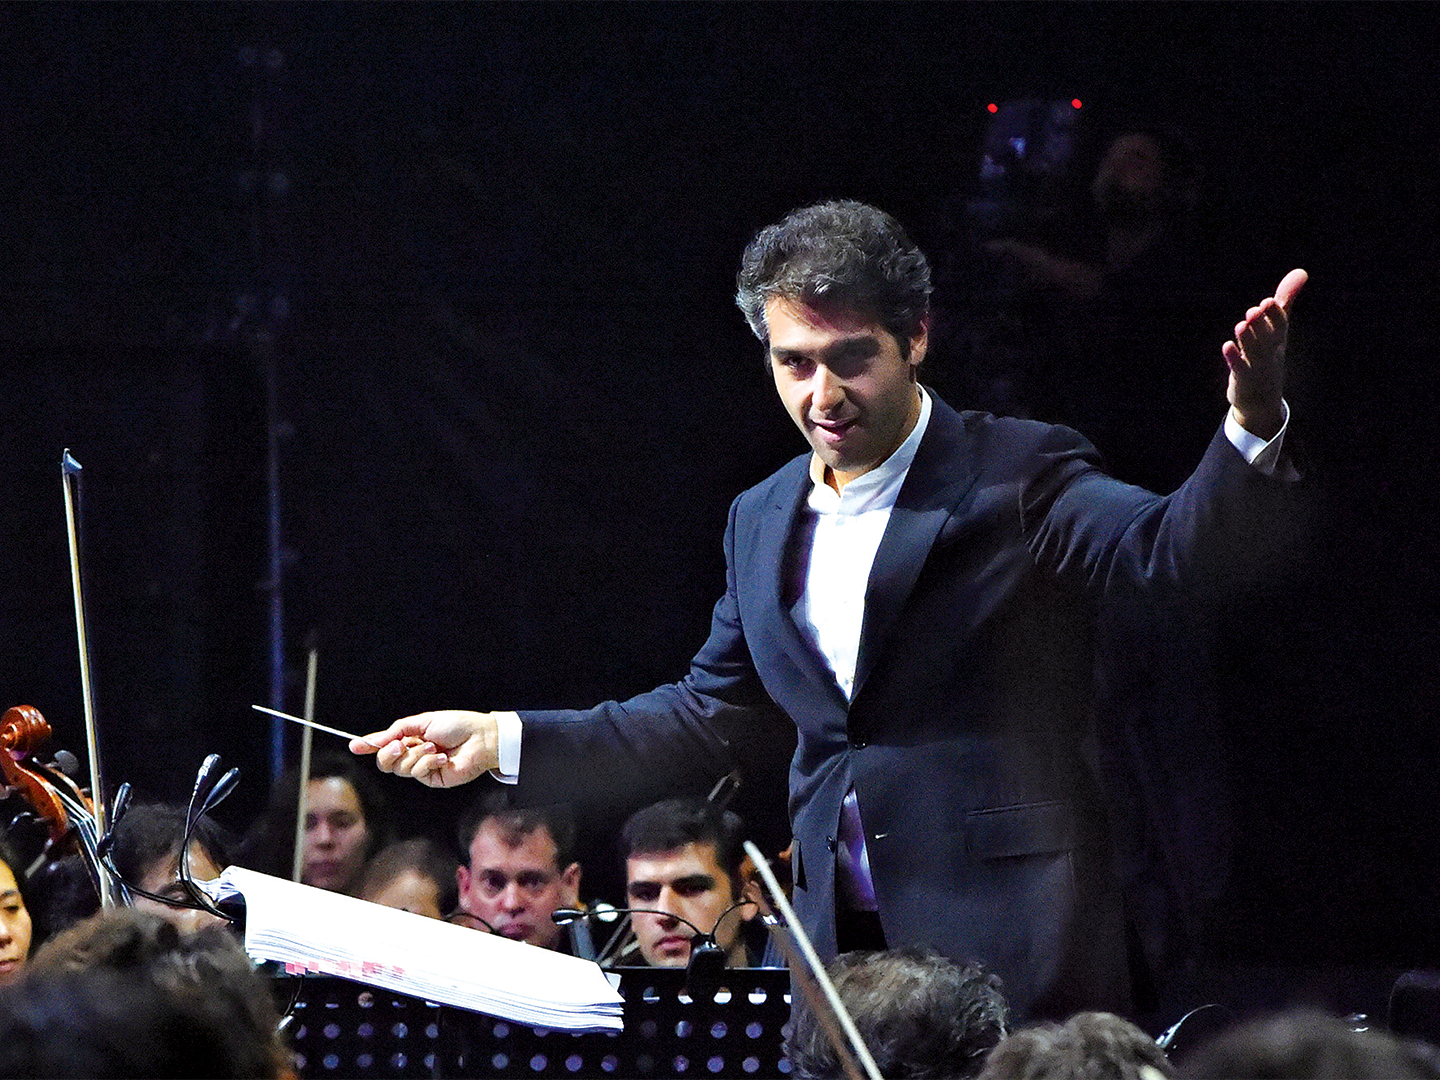 In October 2019, the WCIT World Orchestra, conducted by Sergey Smbatyan, performed the first ever concert of music written live by artificial intelligence. DJ Armin van Buuren later joined the orchestra adding yet another layer to the performance.